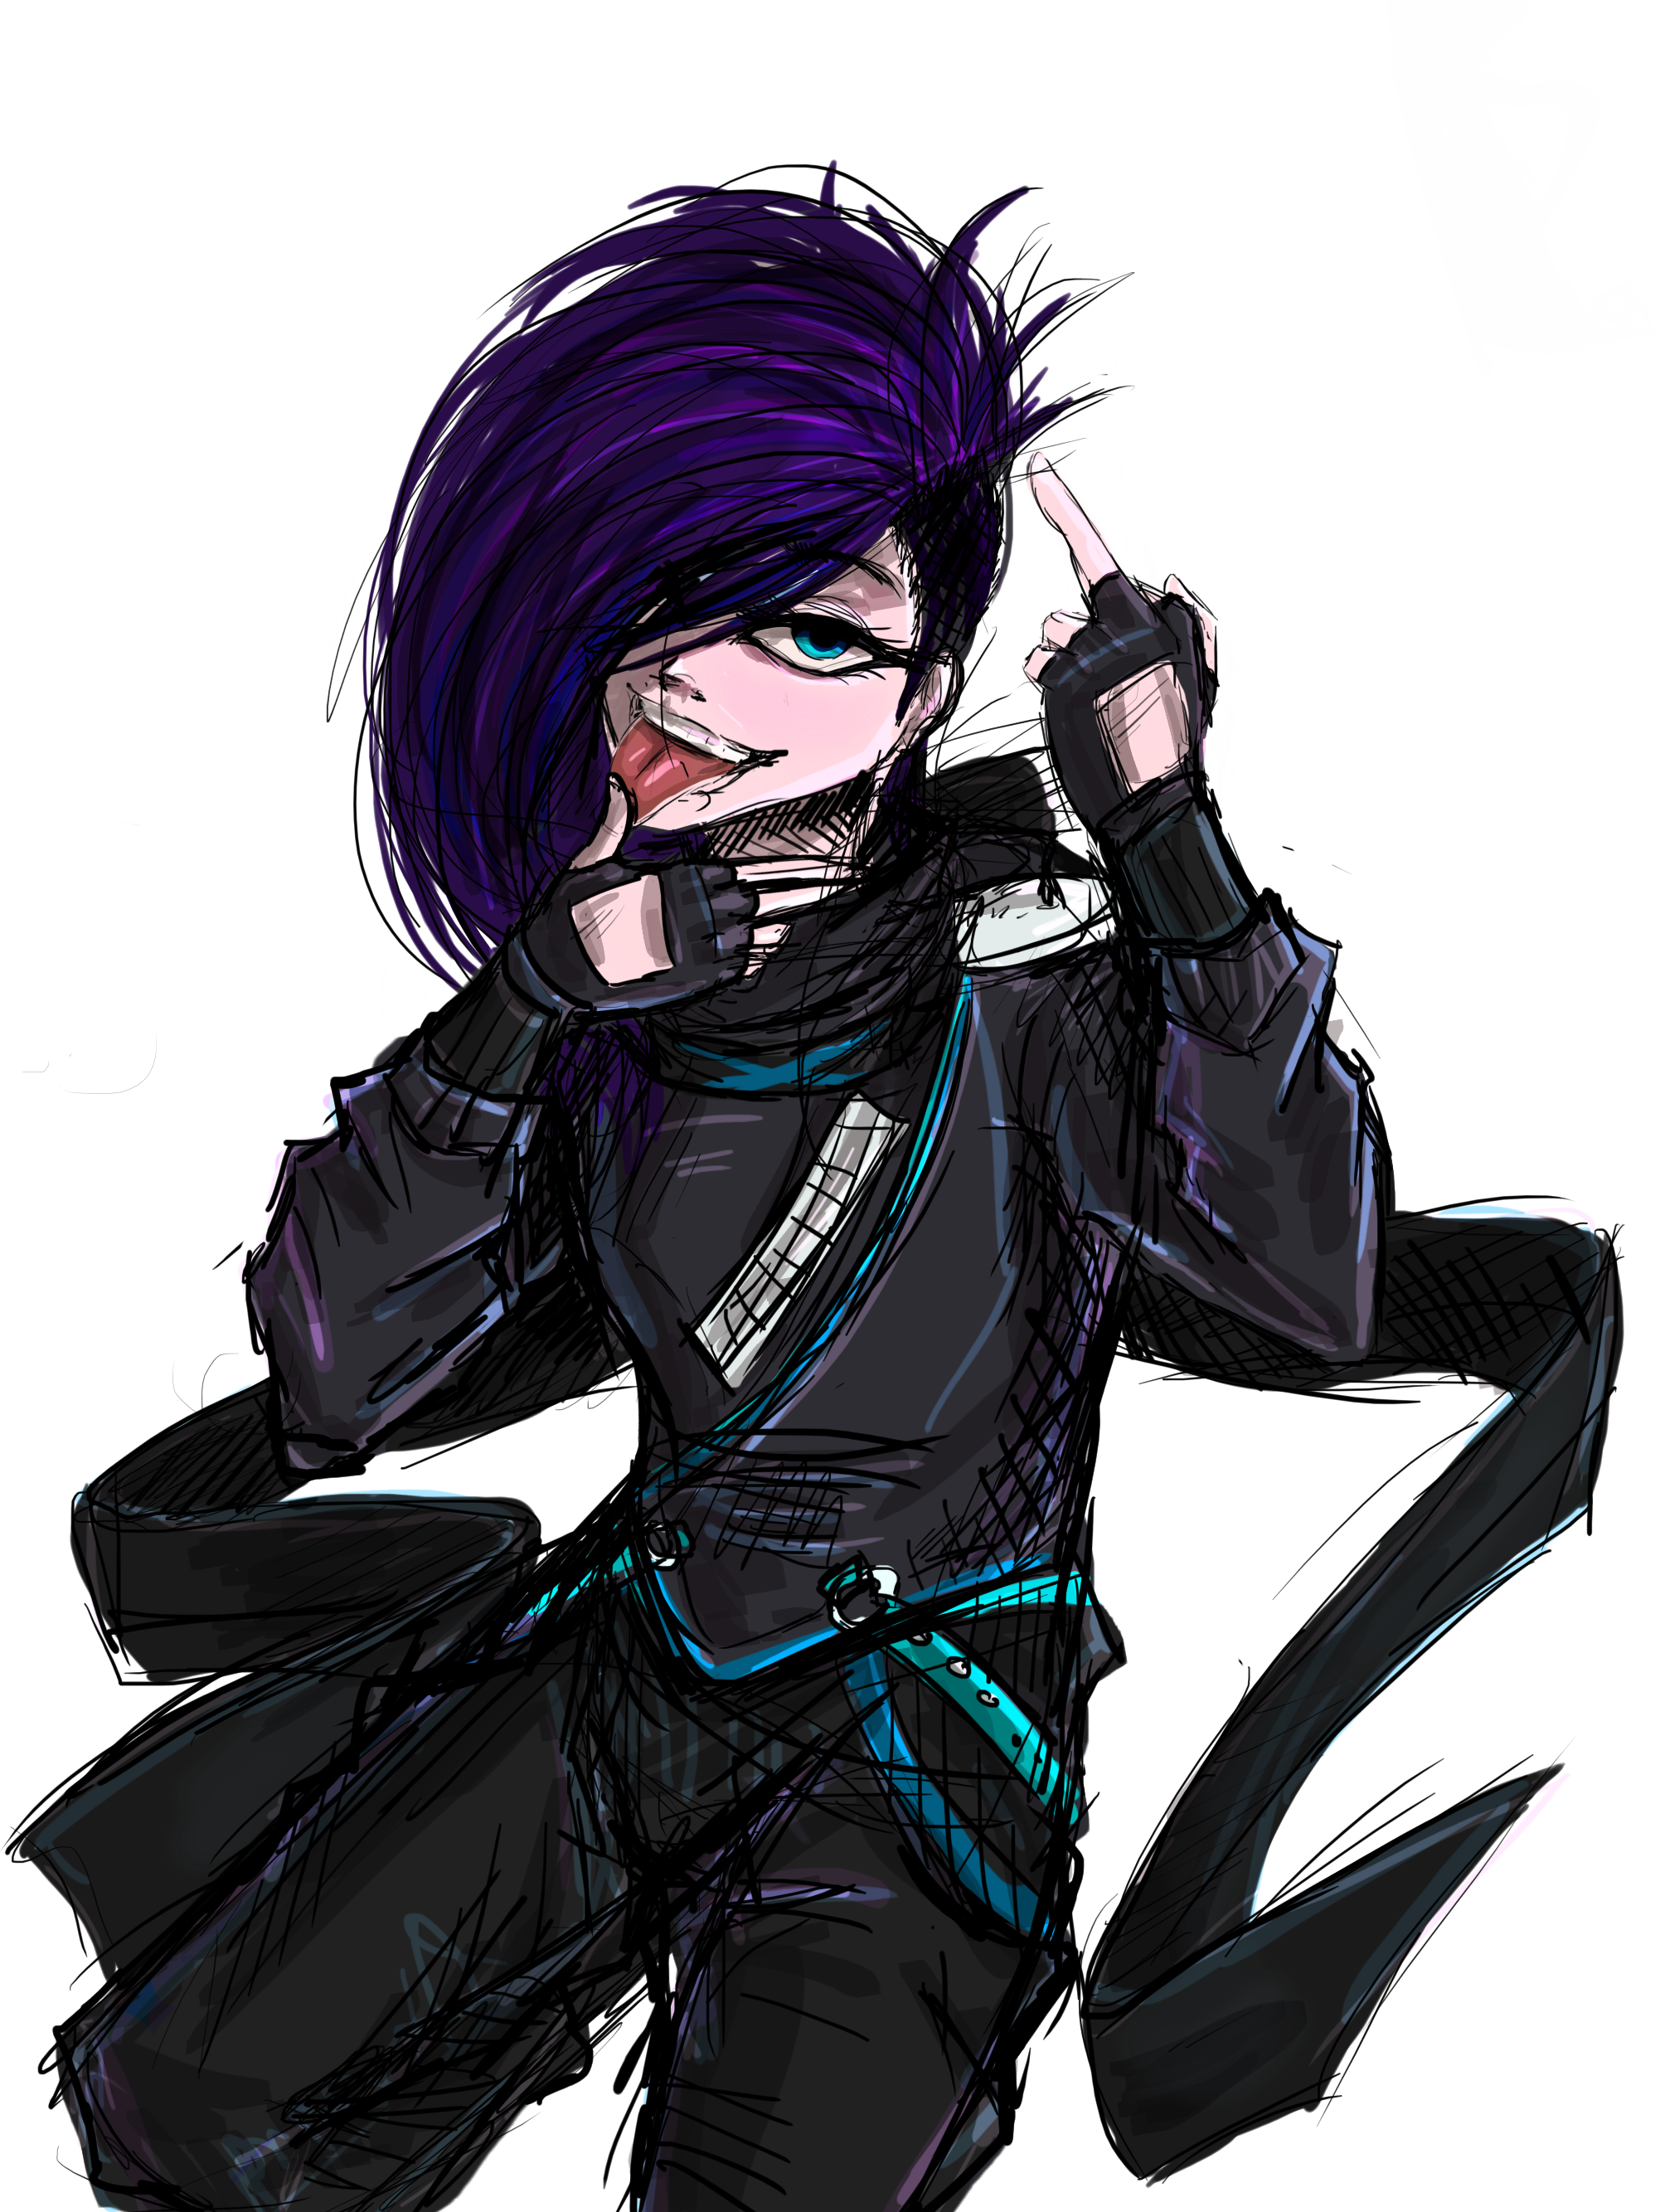 A pale-skinned guy with a purple deathhawk and black clothing, mockincgly licking the thumb of one hand and giving the finger with another